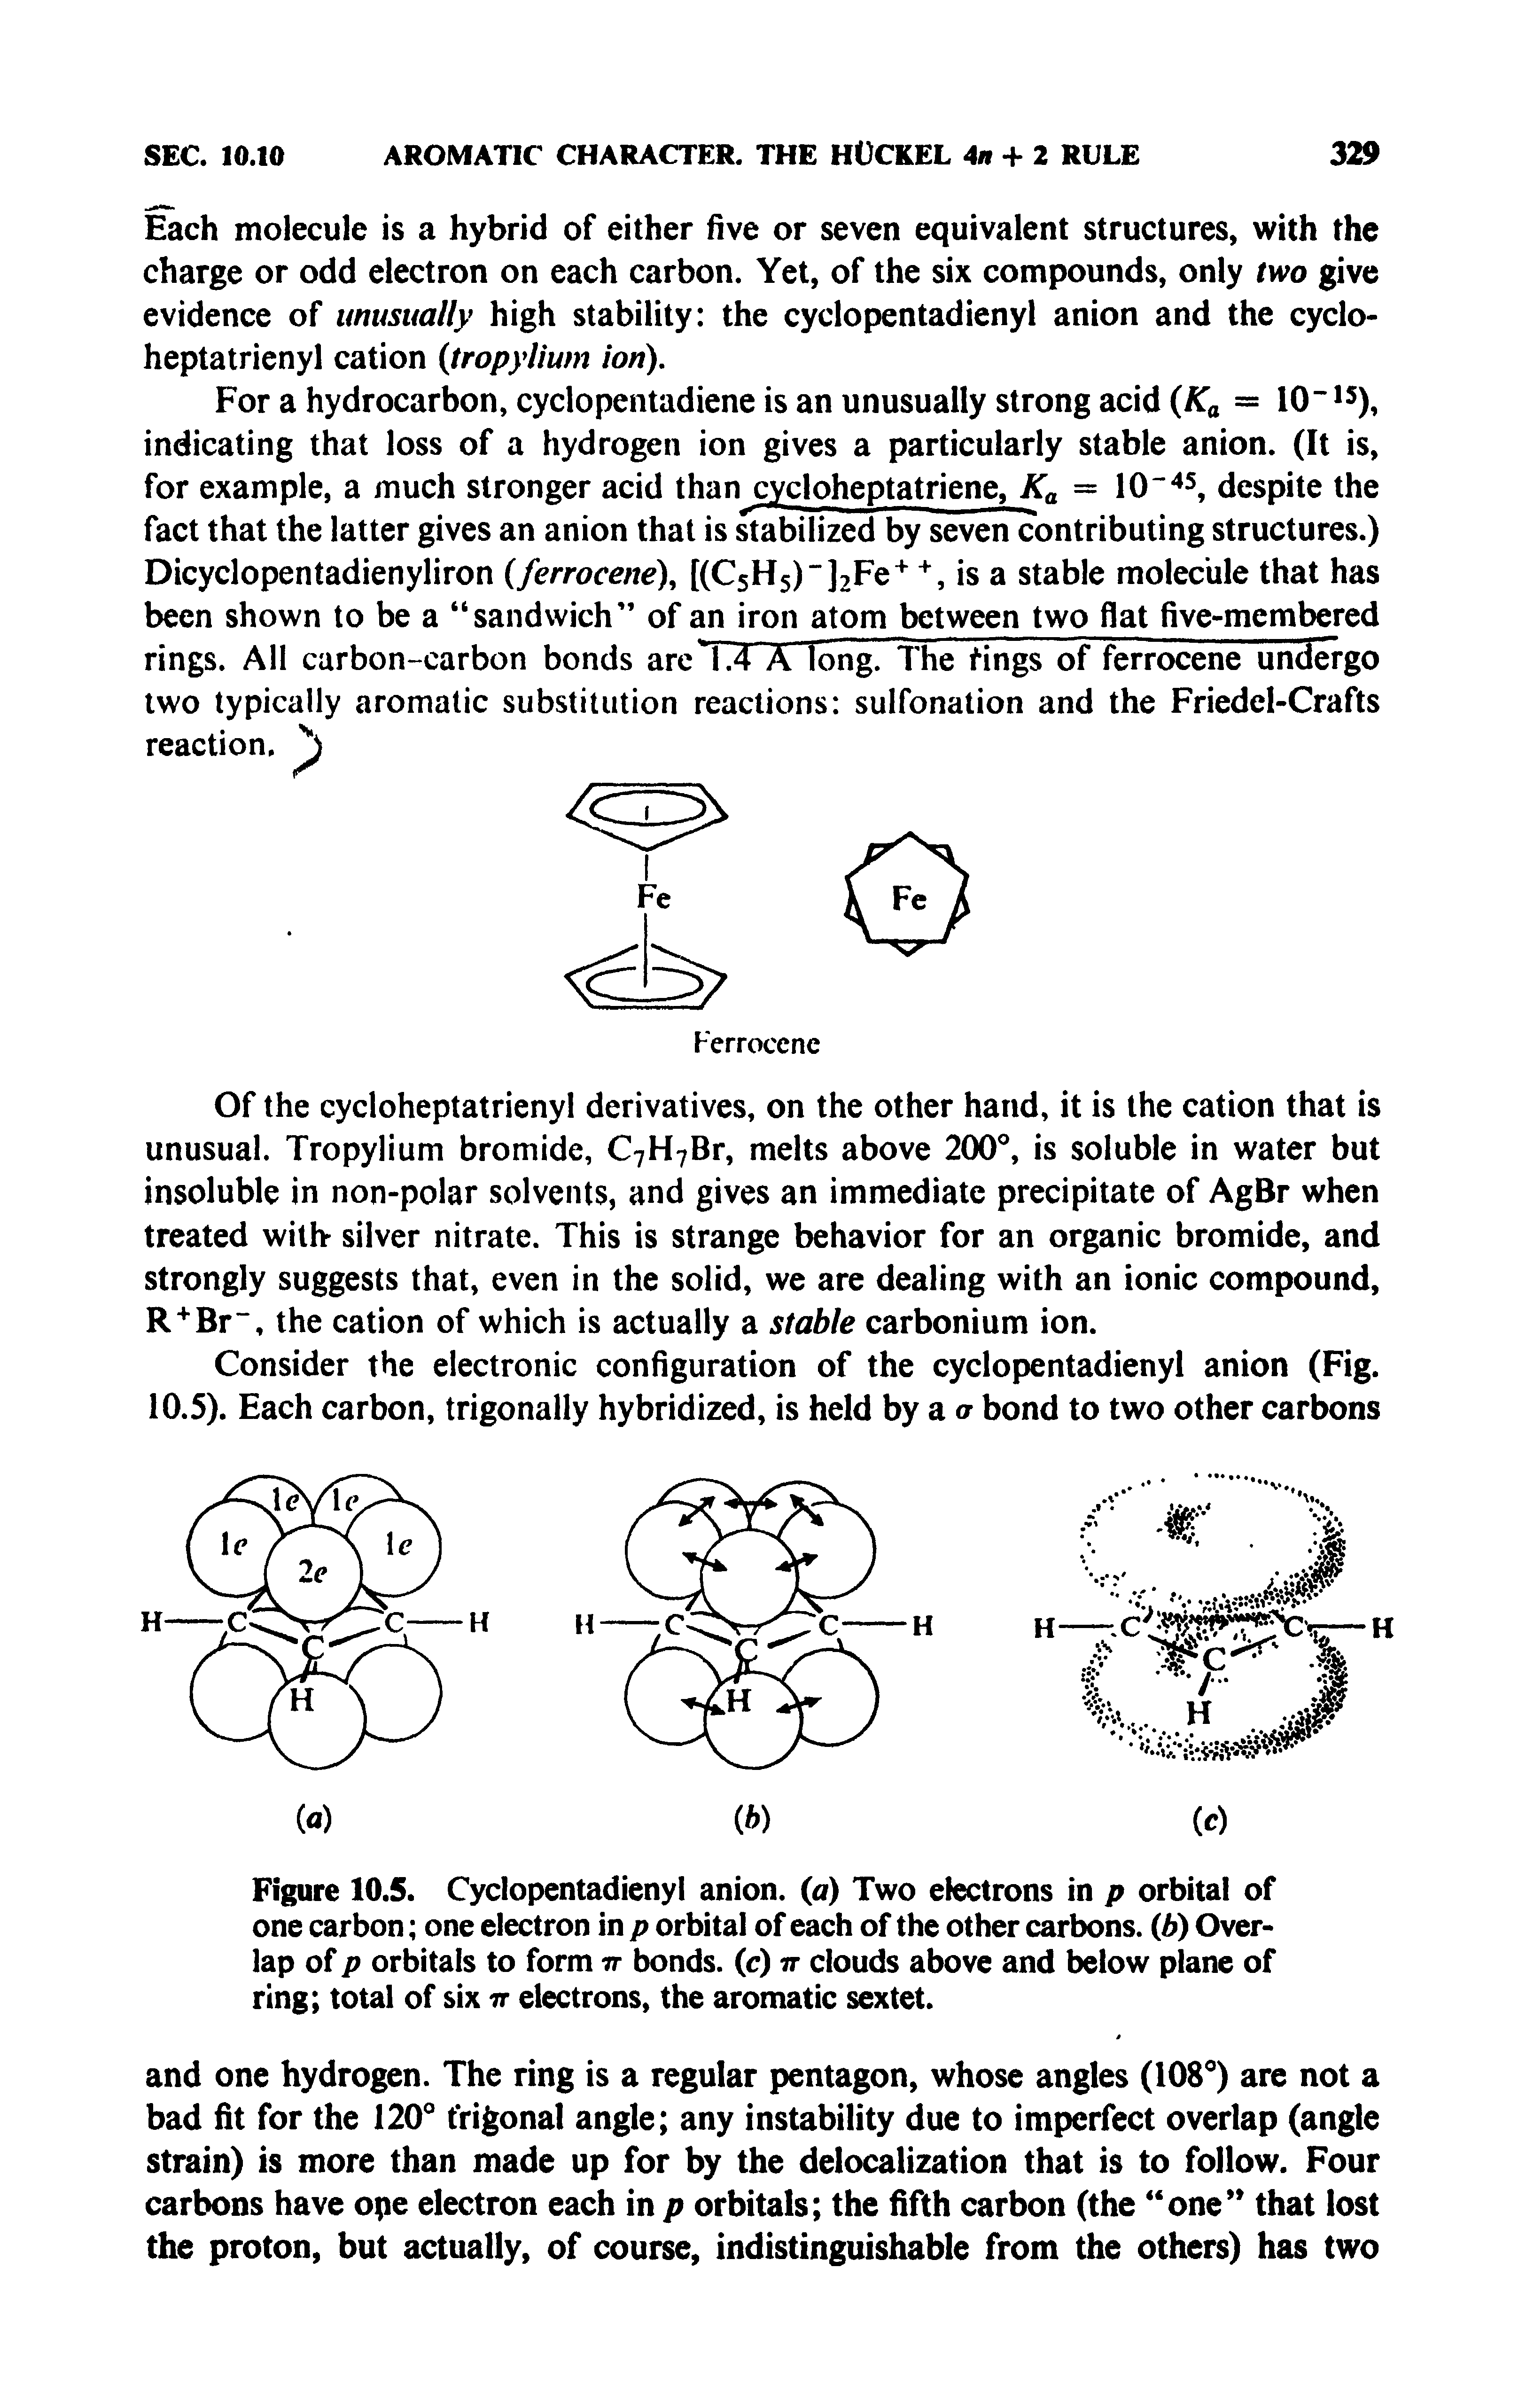 Figure 10.5. Cyclopentadienyl anion, (a) Two electrons in p orbital of one carbon one electron in p orbital of each of the other carbons, (b) Overlap of p orbitals to form n bonds, (c) tt clouds above and below plane of ring total of six tt electrons, the aromatic sextet.